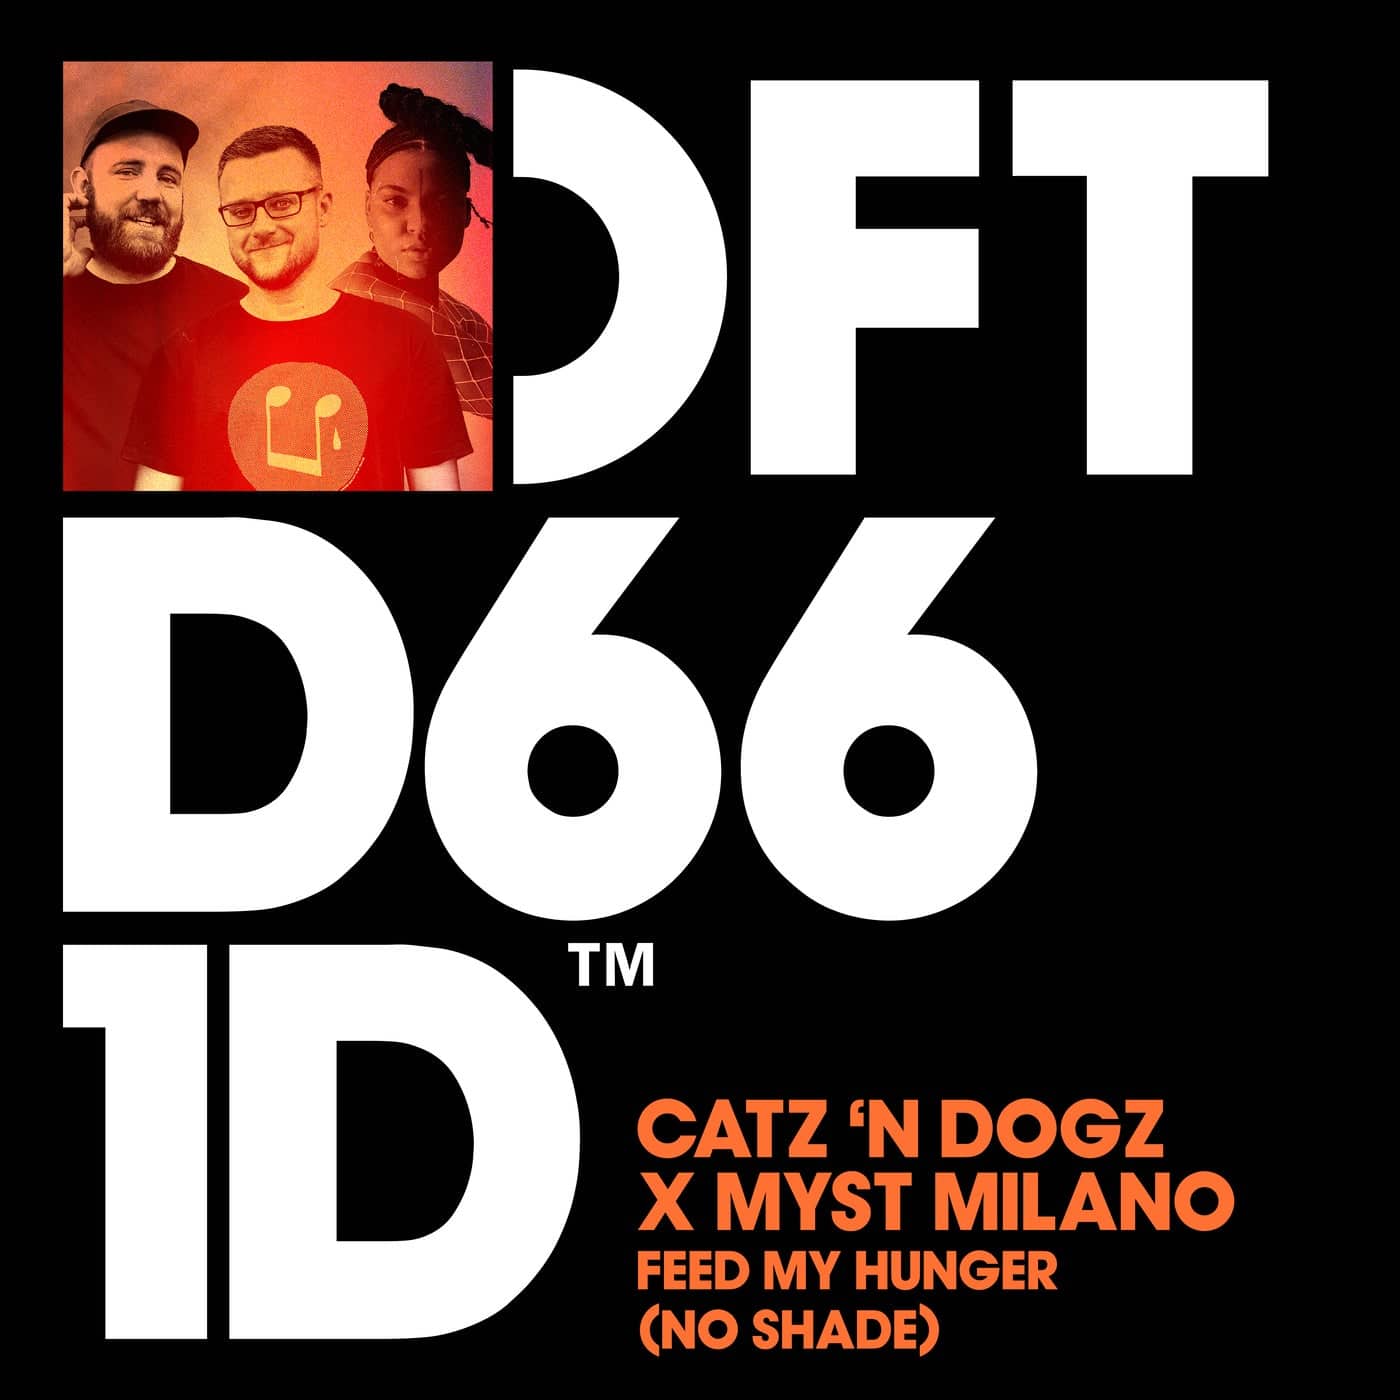 Download Catz 'n Dogz, Myst Milano - Feed My Hunger (No Shade) - Club Mix on Electrobuzz